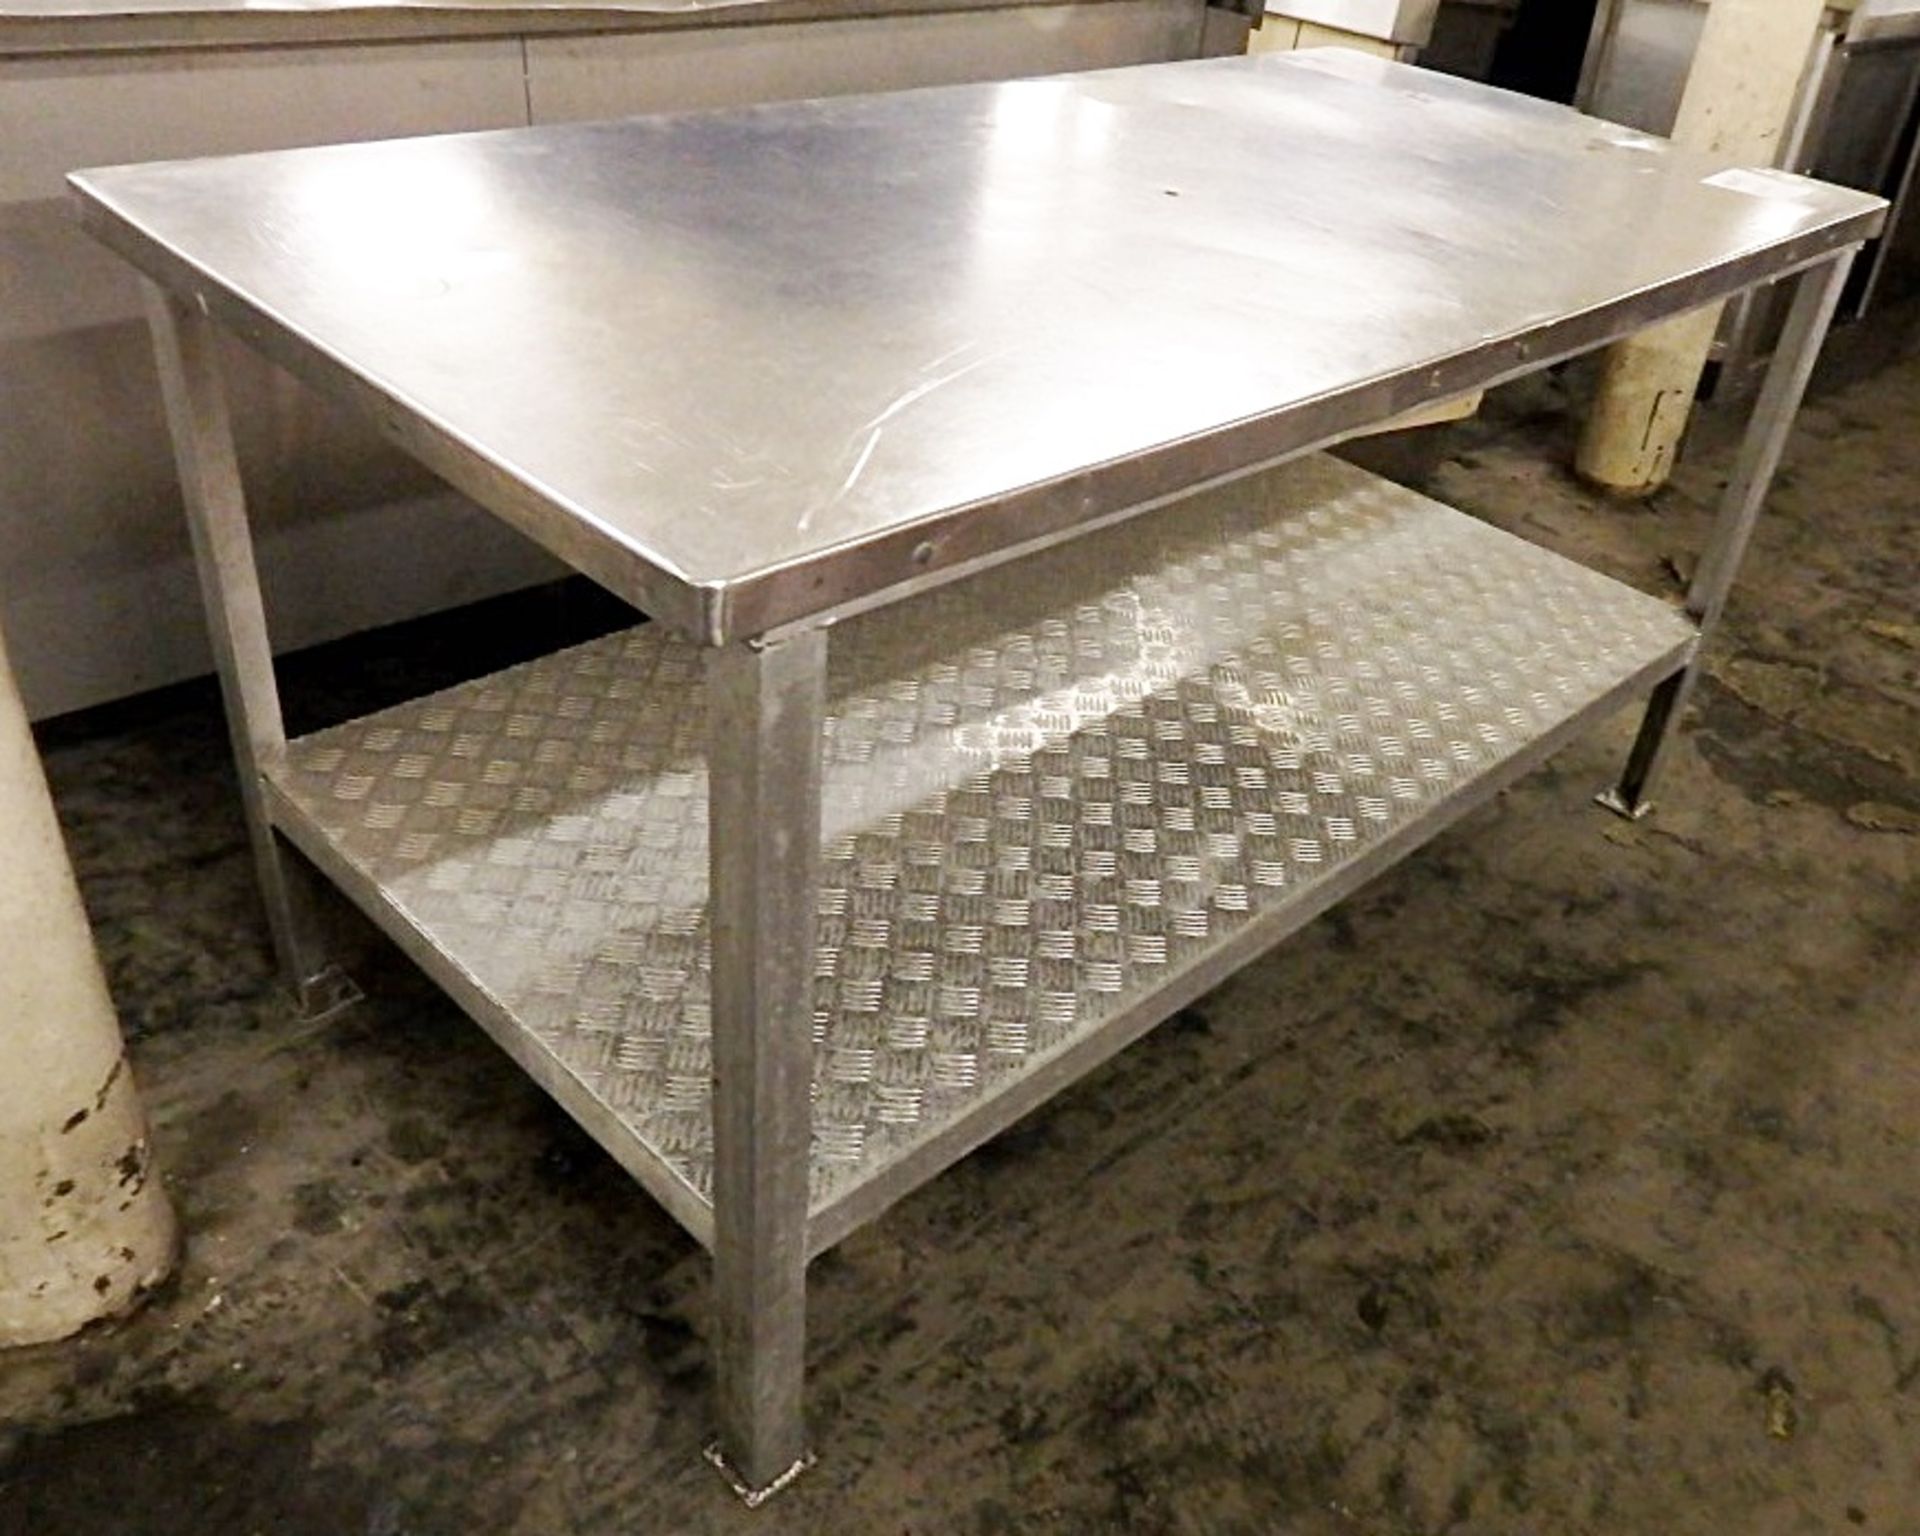 1 x Stainless Steel Commercial Catering Preparation Table - Dimensions: W176 x D84 x H89cm - Ref: